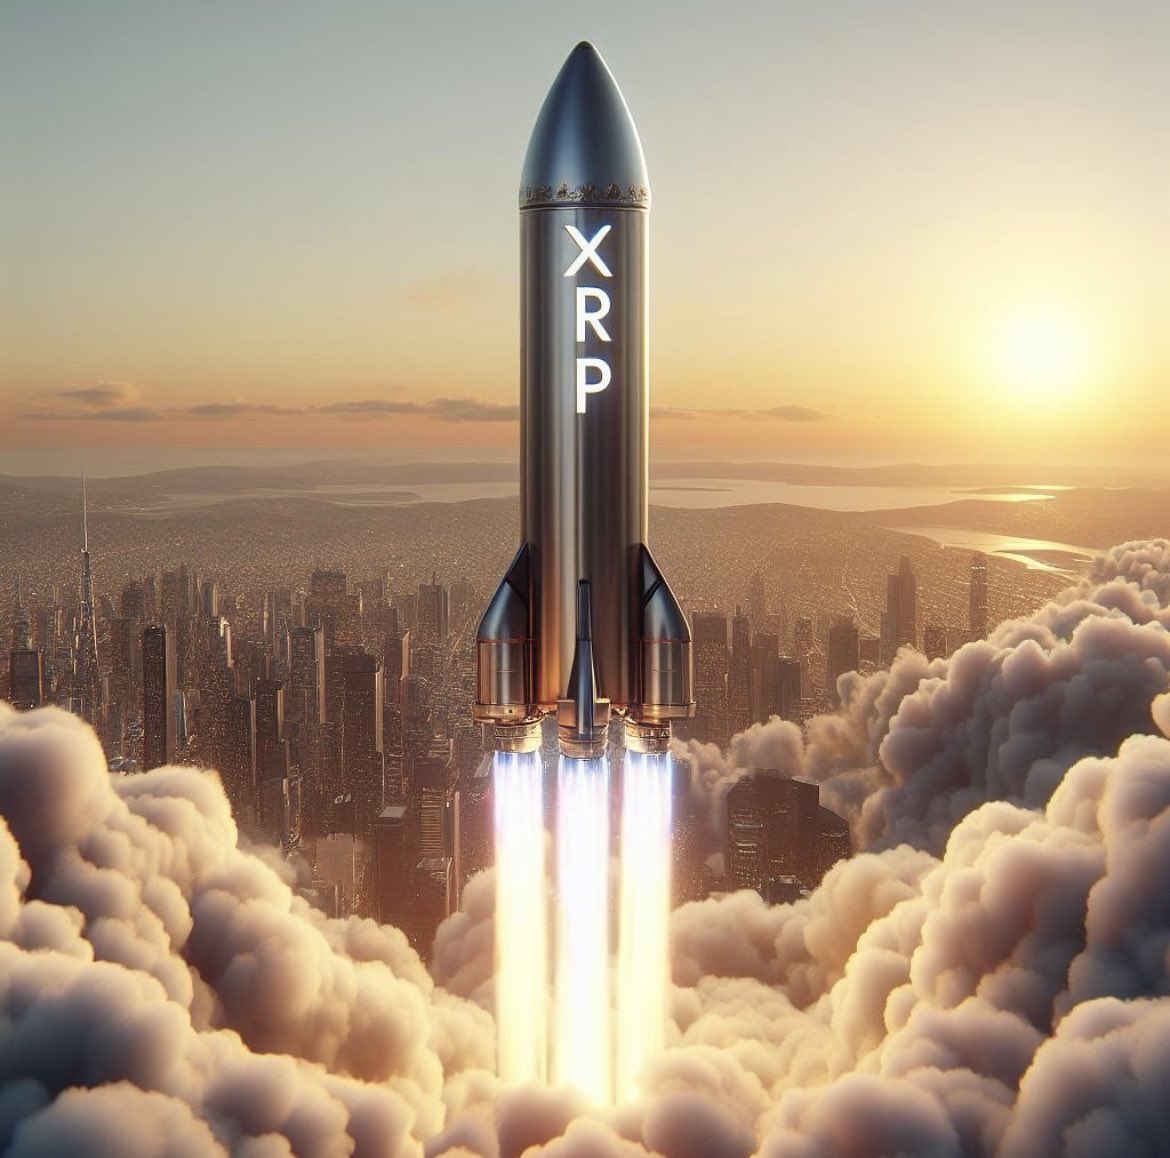 Forget about checking the #XRP price 24/7 - Act like your bags don’t even exist. Everything will unfold when the time is right. We are beyond blessed to even know about this opportunity we invested in. Just think of the multi-trillion dollar problem that XRP will solve